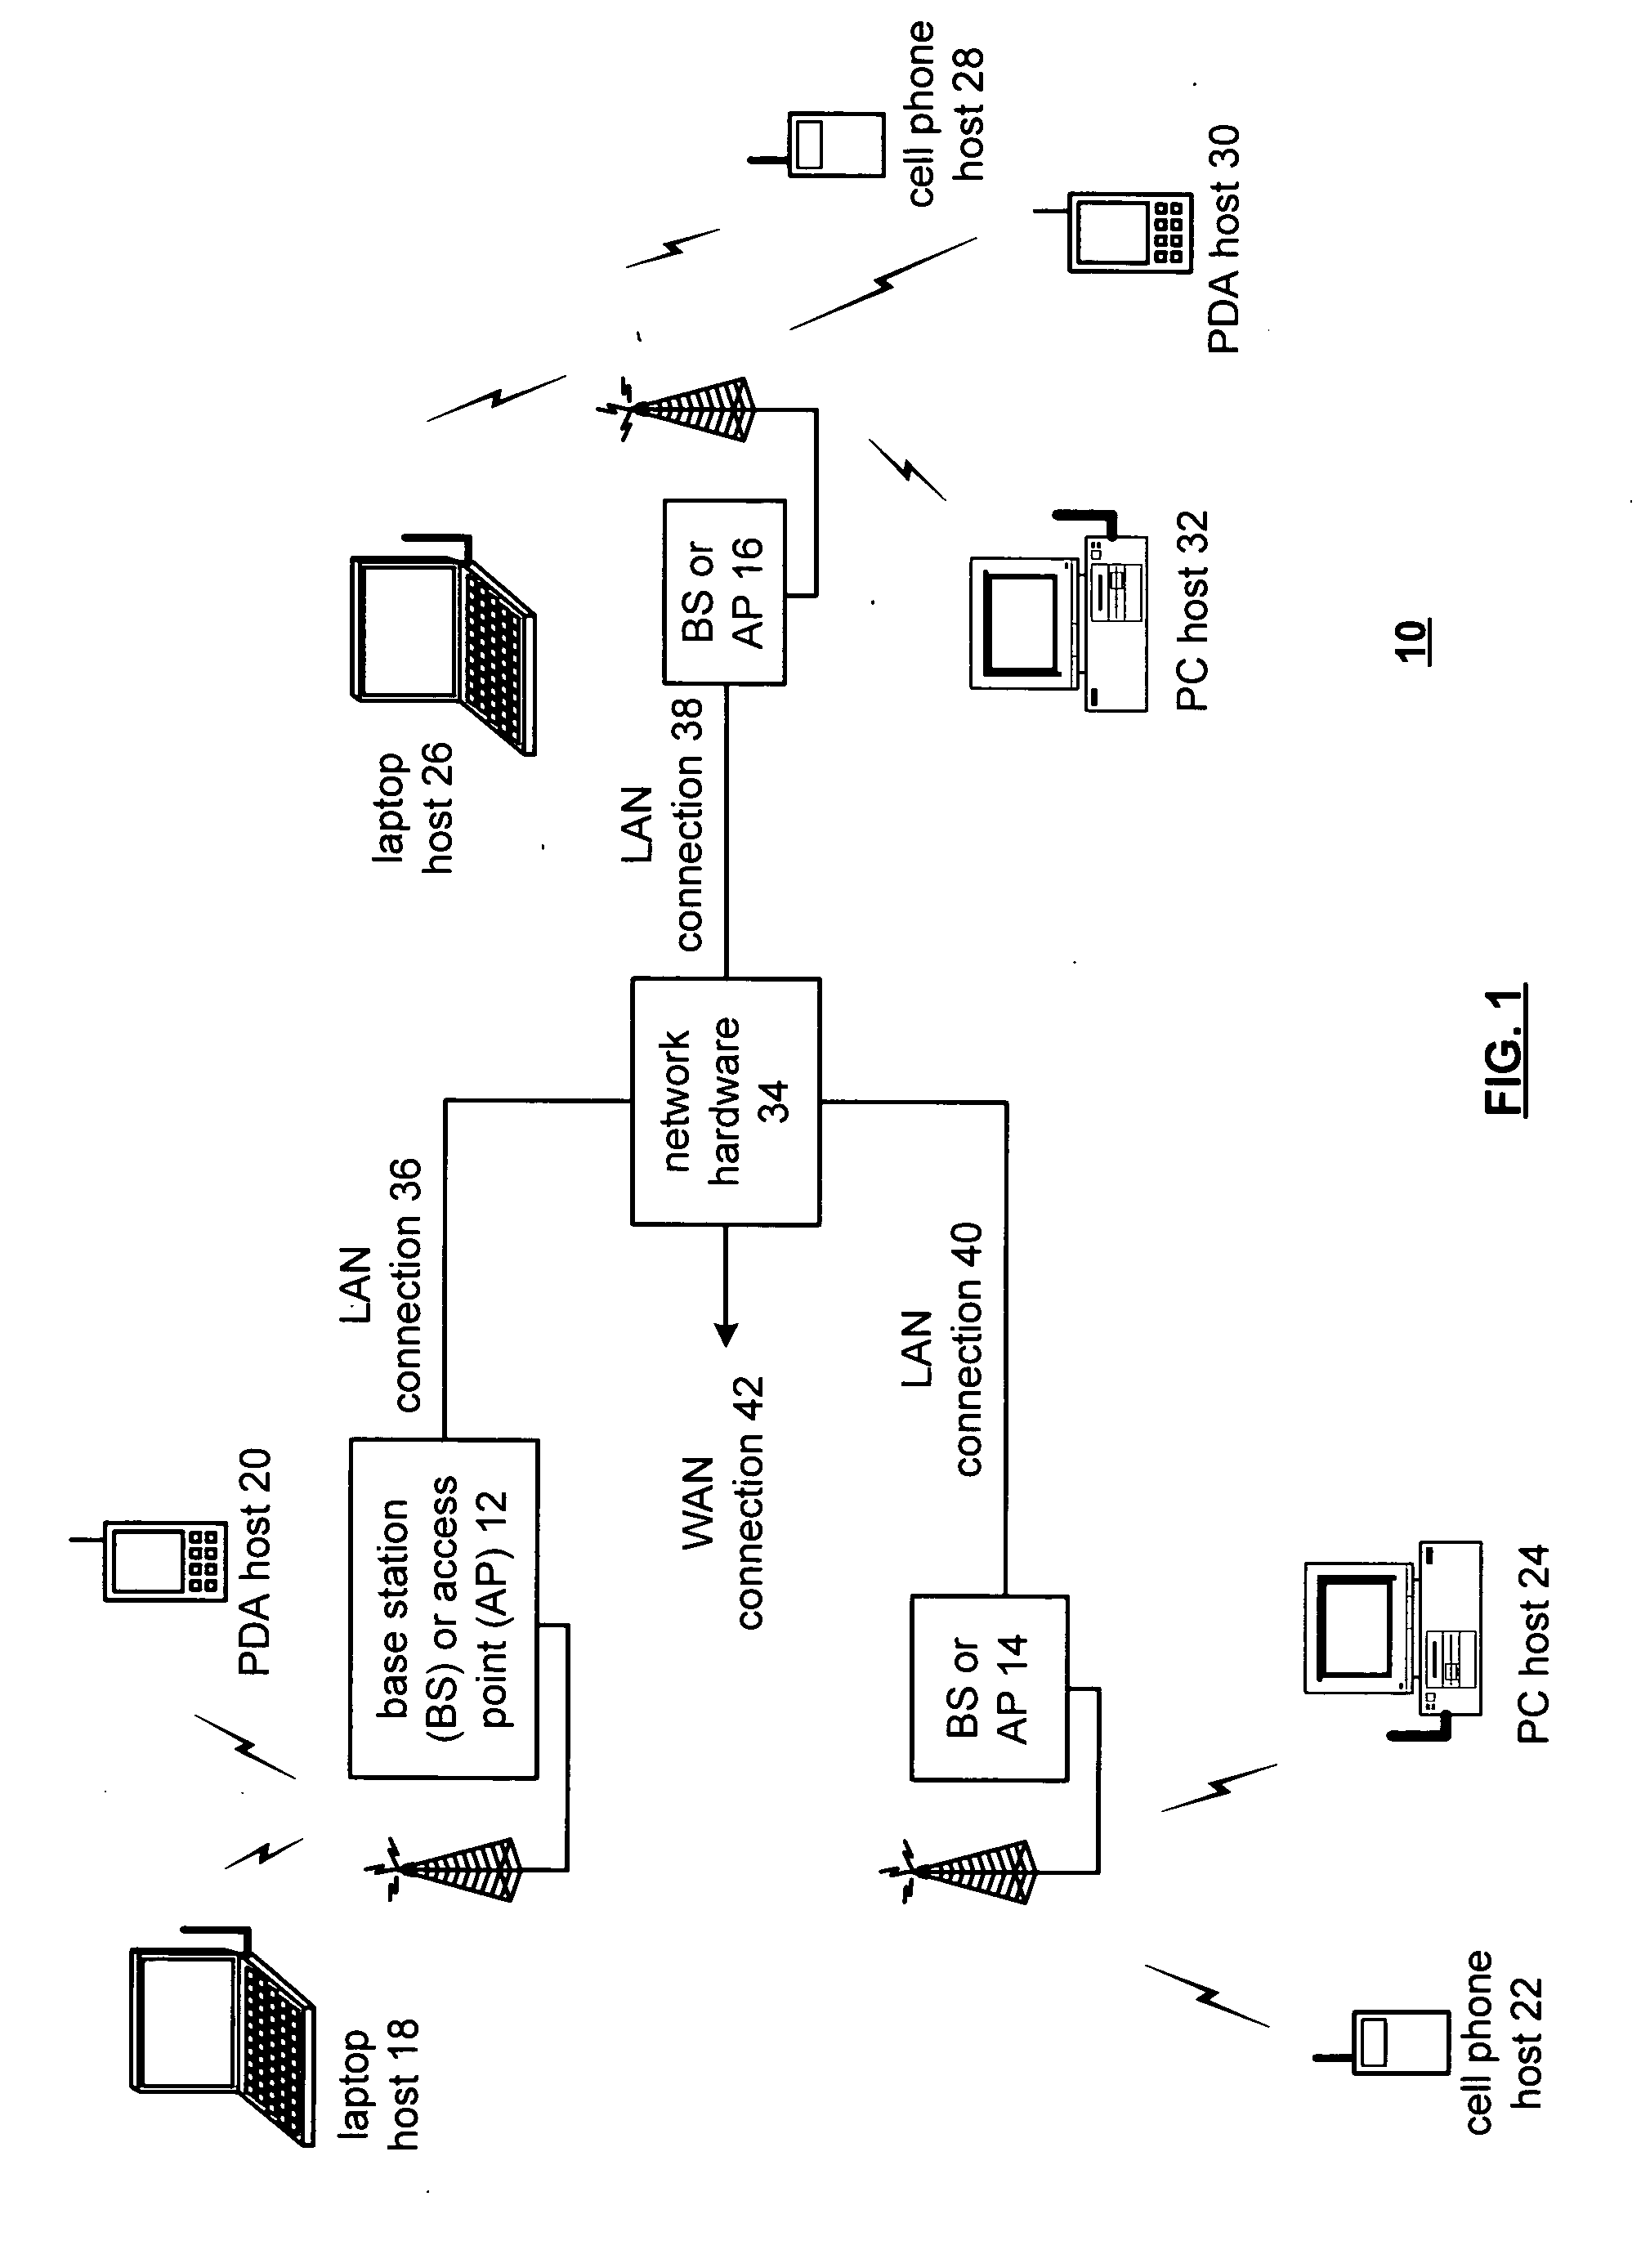 Temperature compensation of transmit power of a wireless communication device